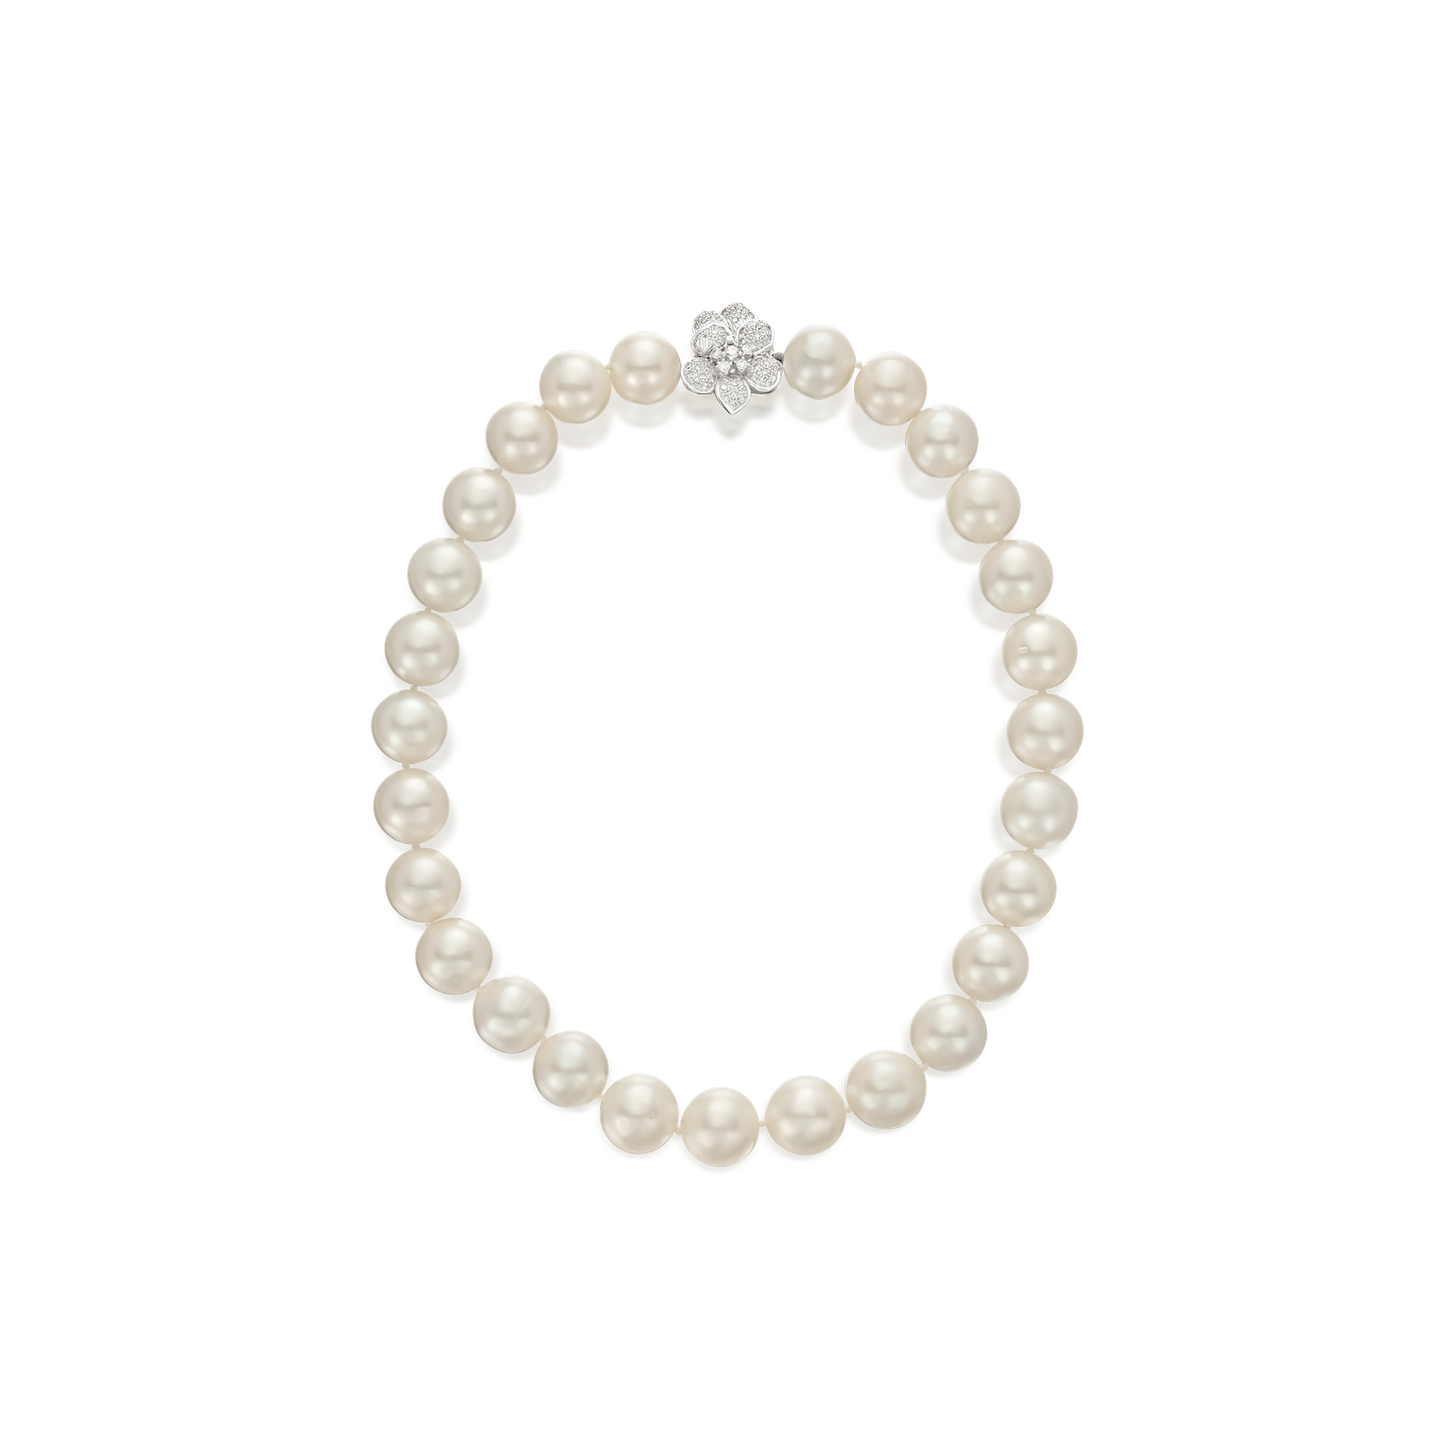 South Sea Cultured Pearl Necklace